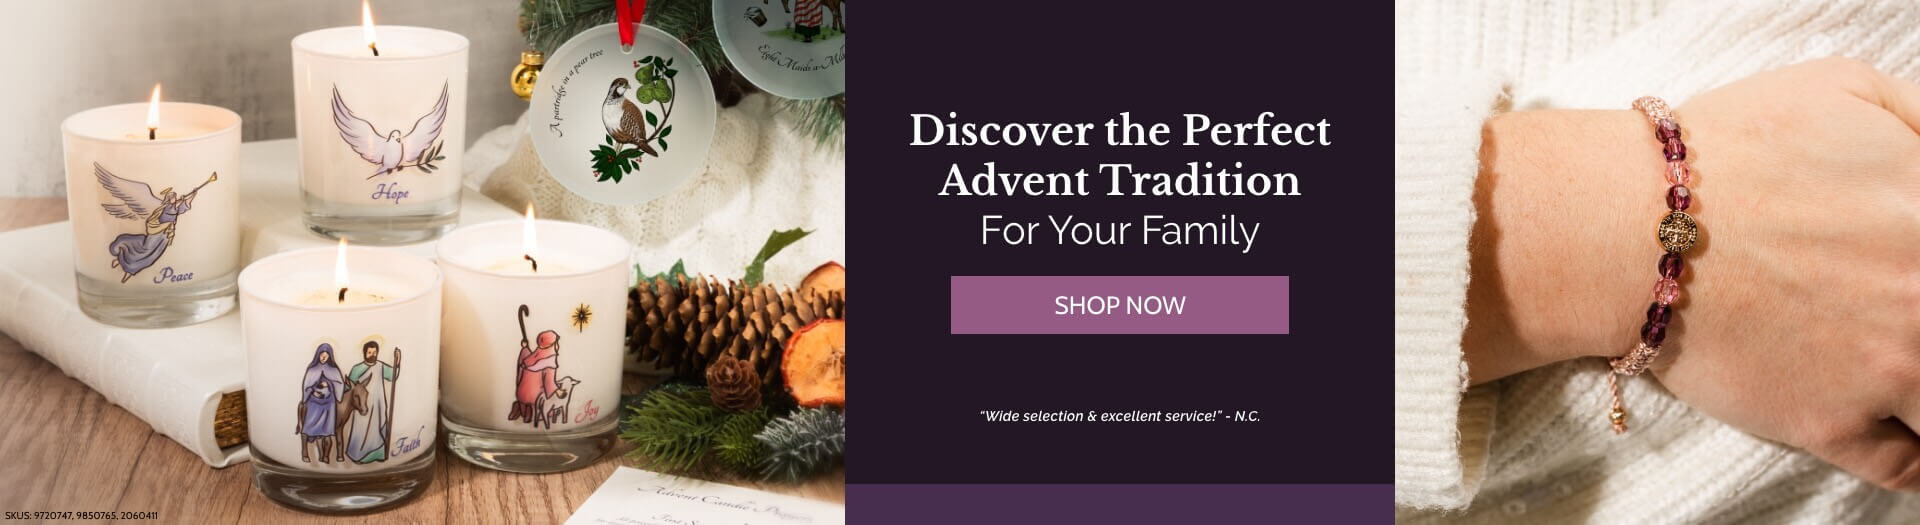 Discover the Perfect Advent Tradition For Your FamilyShop Now